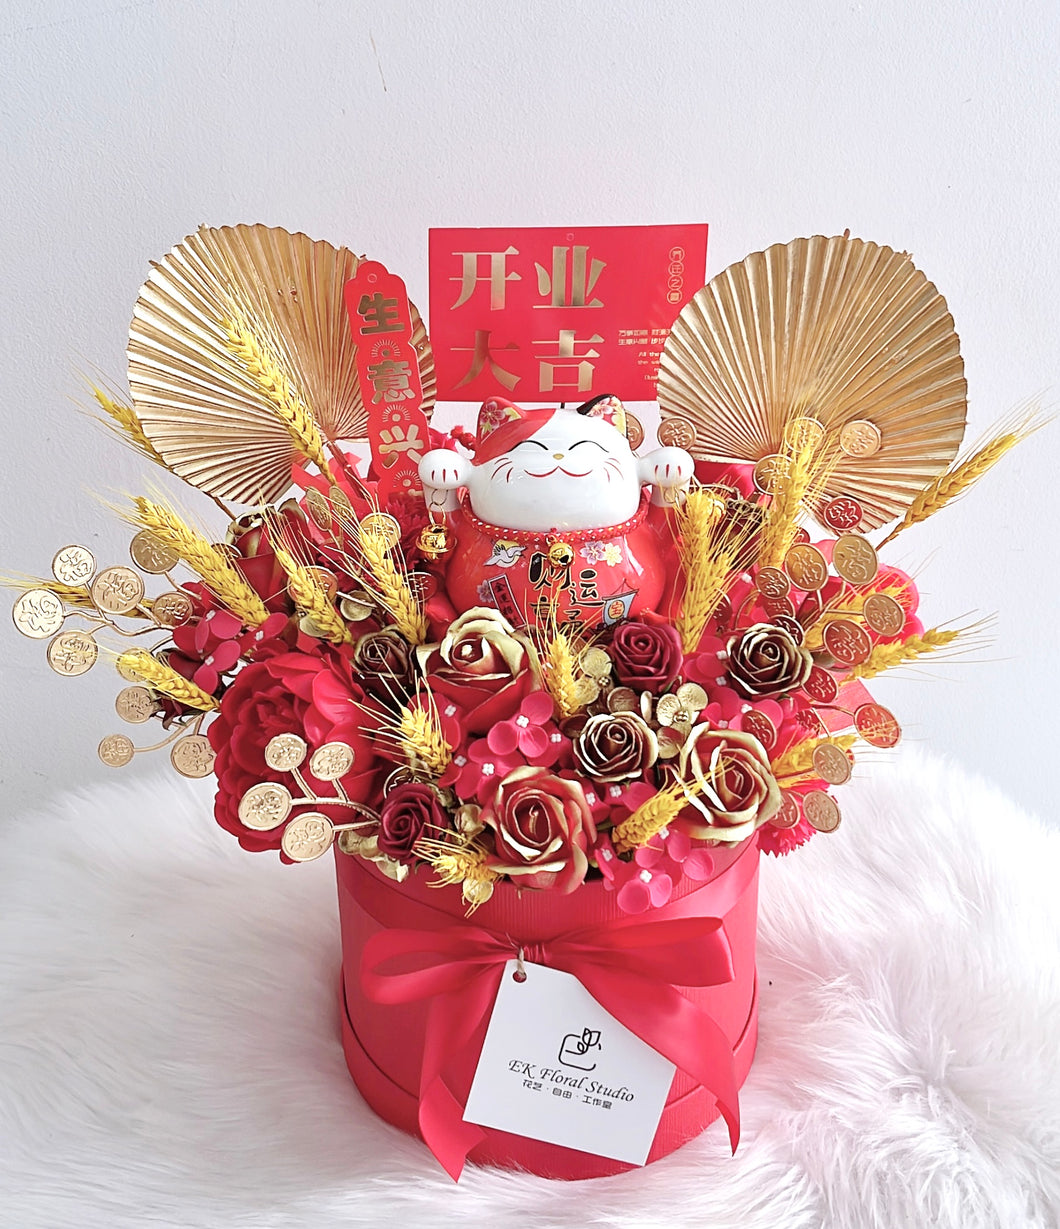 Huat Wheat  Soap Flower Bucket with Fortune Cat 大麦招财猫香皂花开业花盒